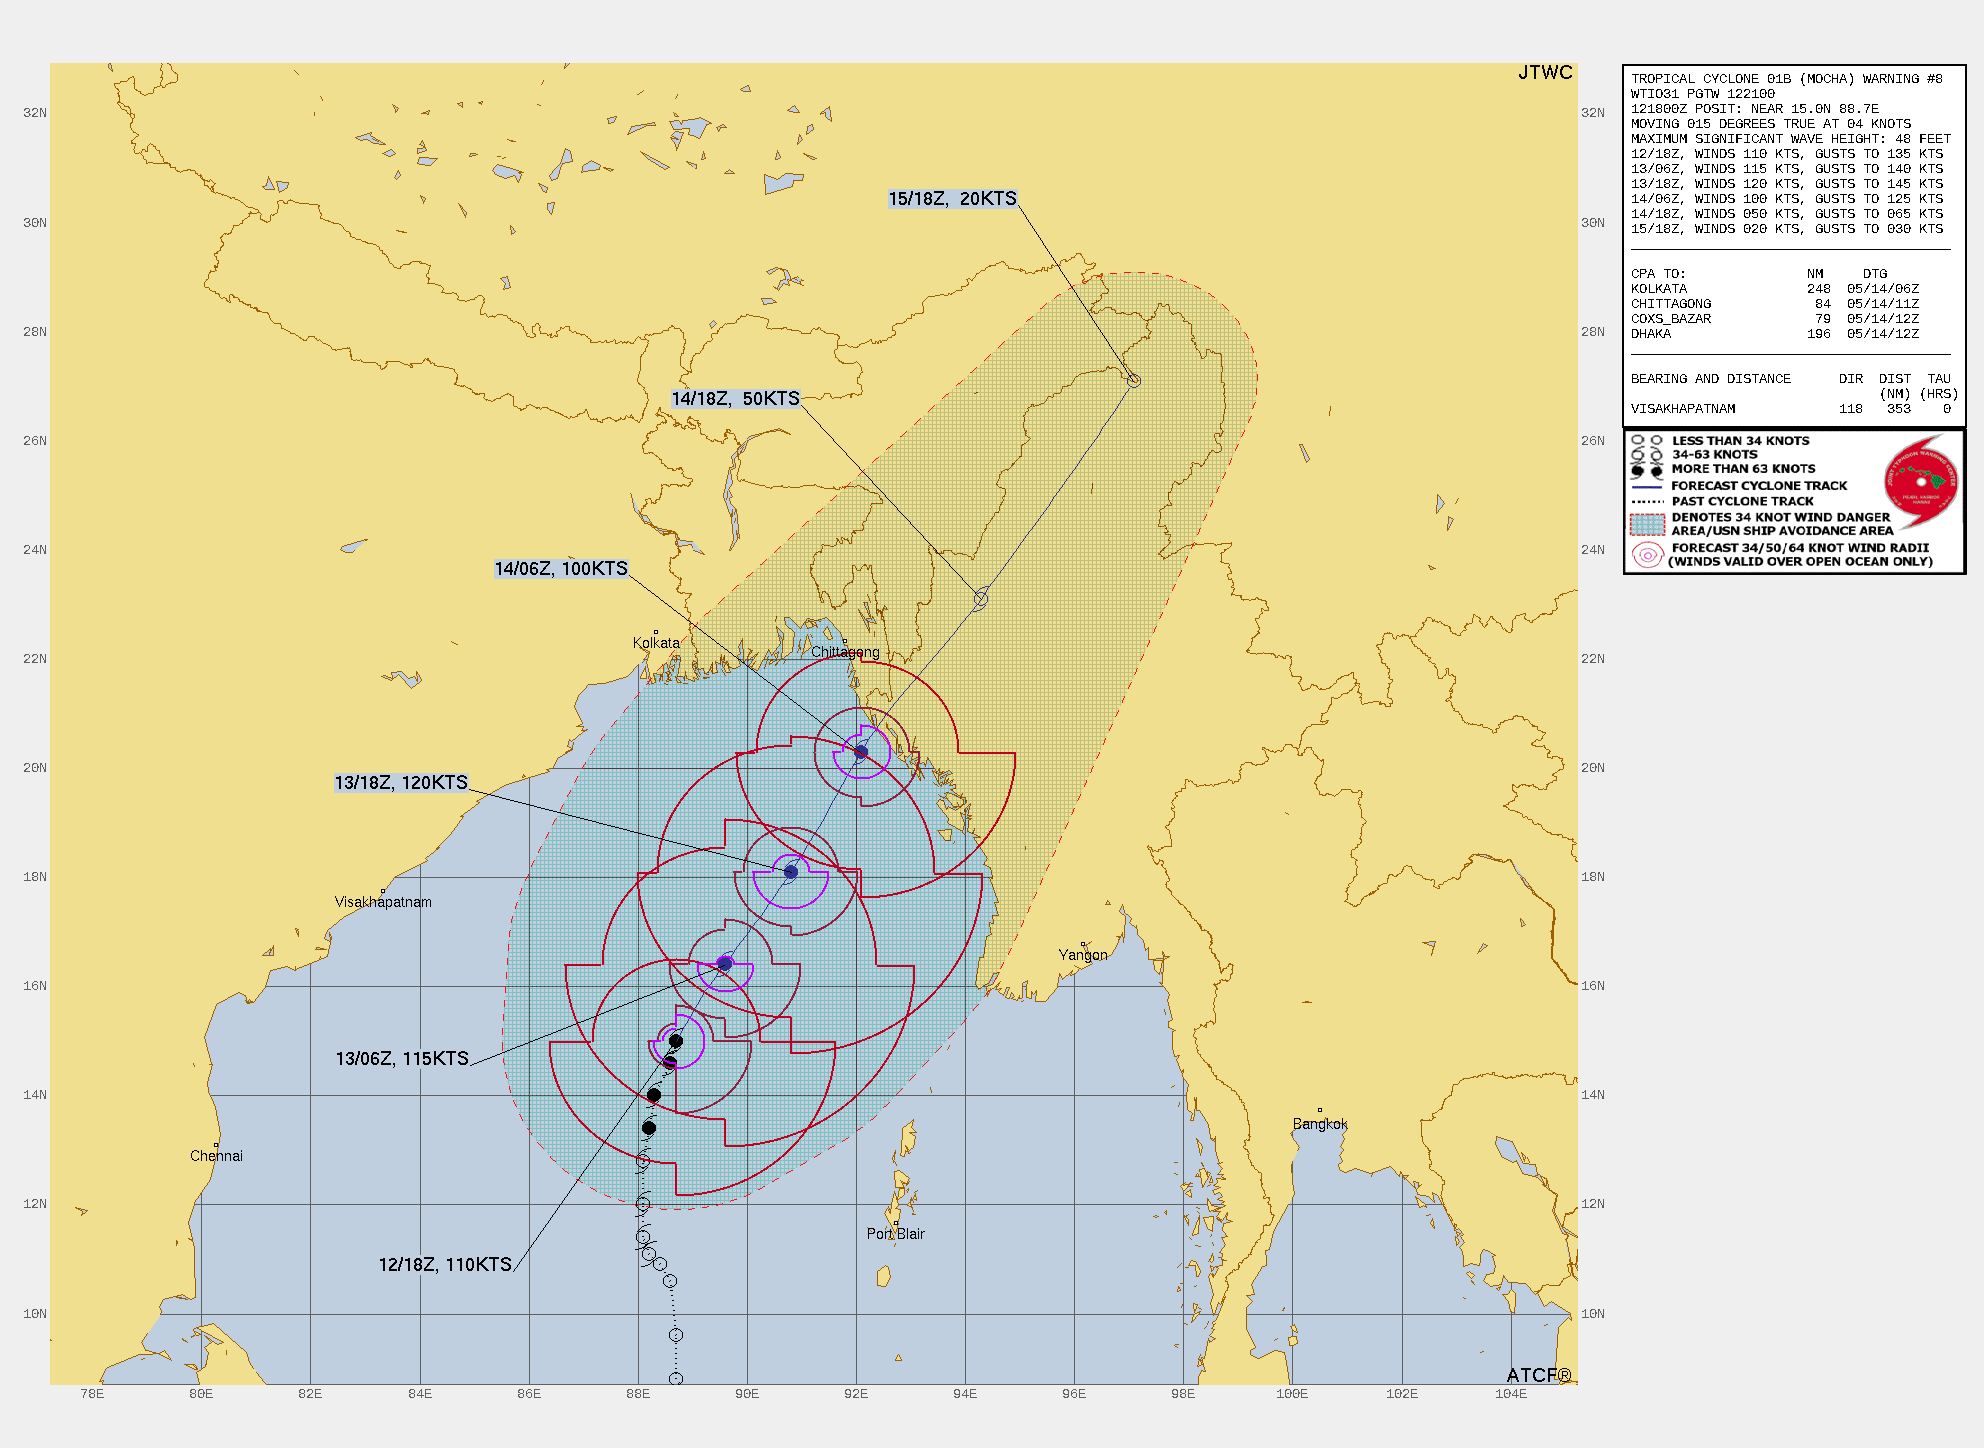 FORECAST REASONING.  SIGNIFICANT FORECAST CHANGES: INCREASE OF INITIAL INTENSITY DUE TO RI.  FORECAST DISCUSSION: TC 01B (MOCHA) IS RIDING THE WESTERN PERIPHERY OF THE STR TO THE EAST. AS PREVIOUSLY MENTIONED, TC MOCHA HAS RAPIDLY INTENSIFIED OVER THE PAST 6 HOURS. BETWEEN TAUS 12 AND 24, TC 01B WILL TRACK NORTHEASTWARD AND CONTINUE TO INTENSIFY TO 115 KTS AND 120 KTS RESPECTIVELY AS THE SYSTEM WILL CONTINUE TO STRENGTHEN. BY TAU 36, PRIOR TO LANDFALL JUST SOUTH OF THE BANGLADESH AND MYANMAR BORDER, TC MOCHA WILL DECREASE IN INTENSITY TO 100 KNOTS AS THE ENVIRONMENT WILL BECOME LESS FAVORABLE. THESE LESS FAVORABLE CONDITIONS ARE DEFINED BY AN INCREASE IN VWS, DRY AIR ENTRAINMENT WRAPPING INTO THE LLCC FROM THE SOUTHERN PERIPHERY, THE ONSET OF LAND INTERACTION, AND COOLER (28-29 C) SST. BY TAU 42, TC 01B WILL MAKE LANDFALL AND BEGIN ITS DISSIPATION PHASE. BETWEEN TAUS 48 AND 72, TC MOCHA WILL DISSIPATE DUE TO LAND INTERACTION OVER NORTHWEST MYANMAR.